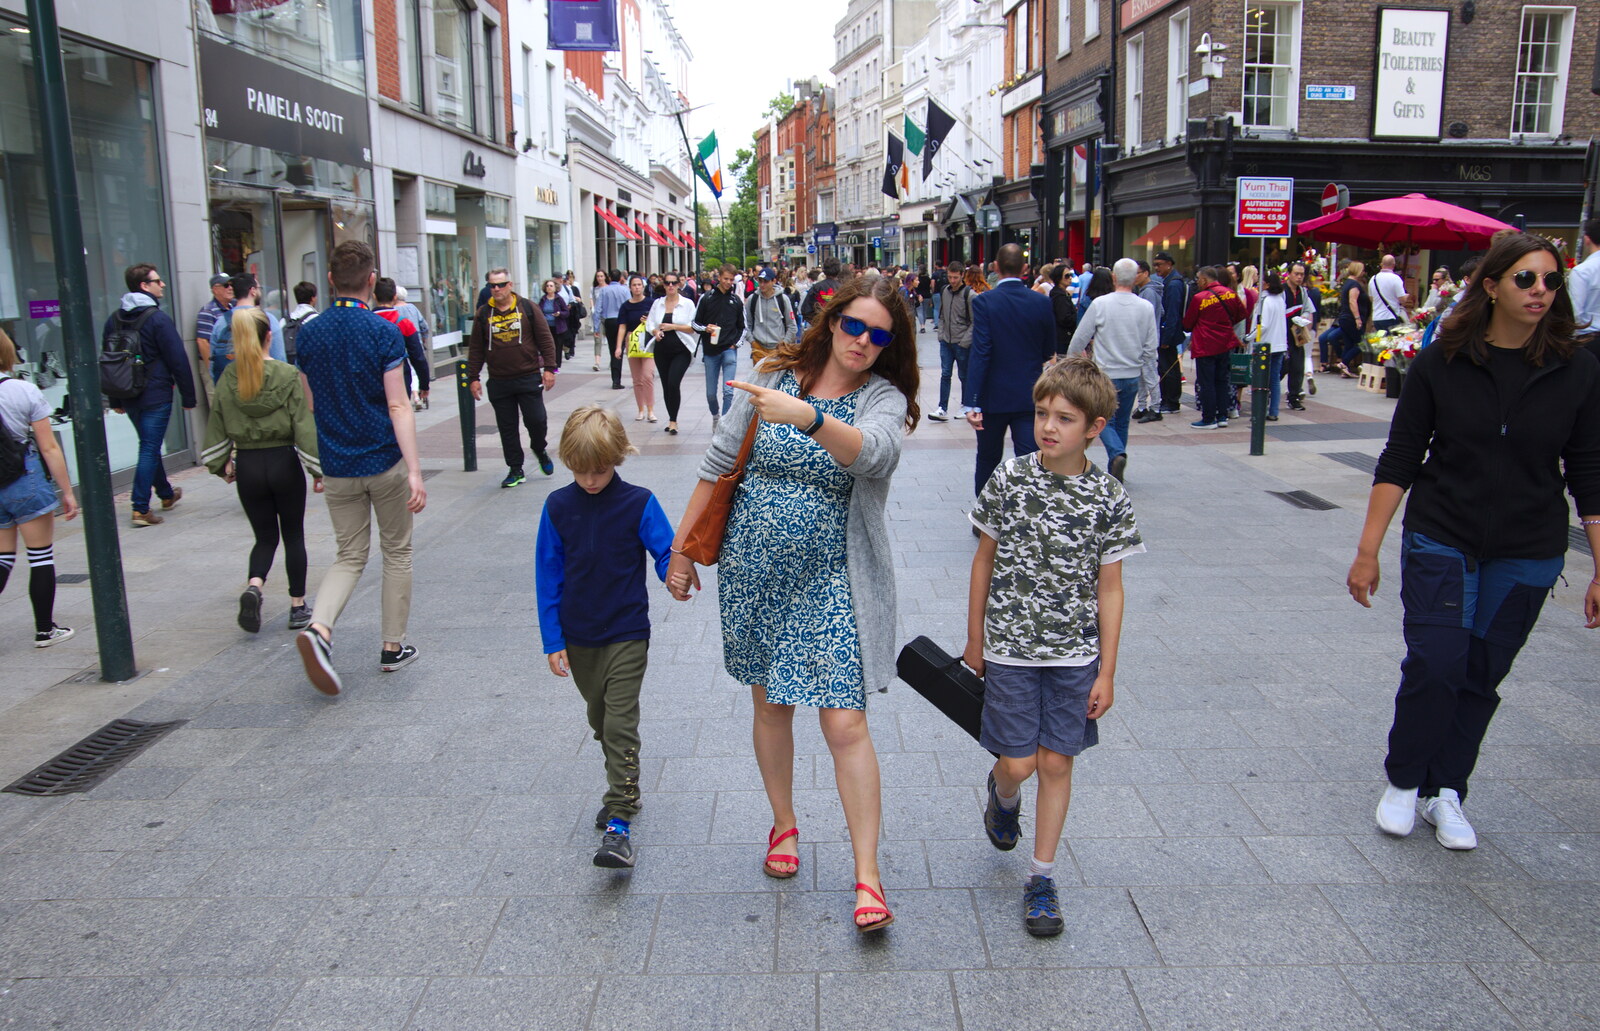 The gang on Grafton Street from Busking in Temple Bar, Dublin, Ireland - 12th August 2019